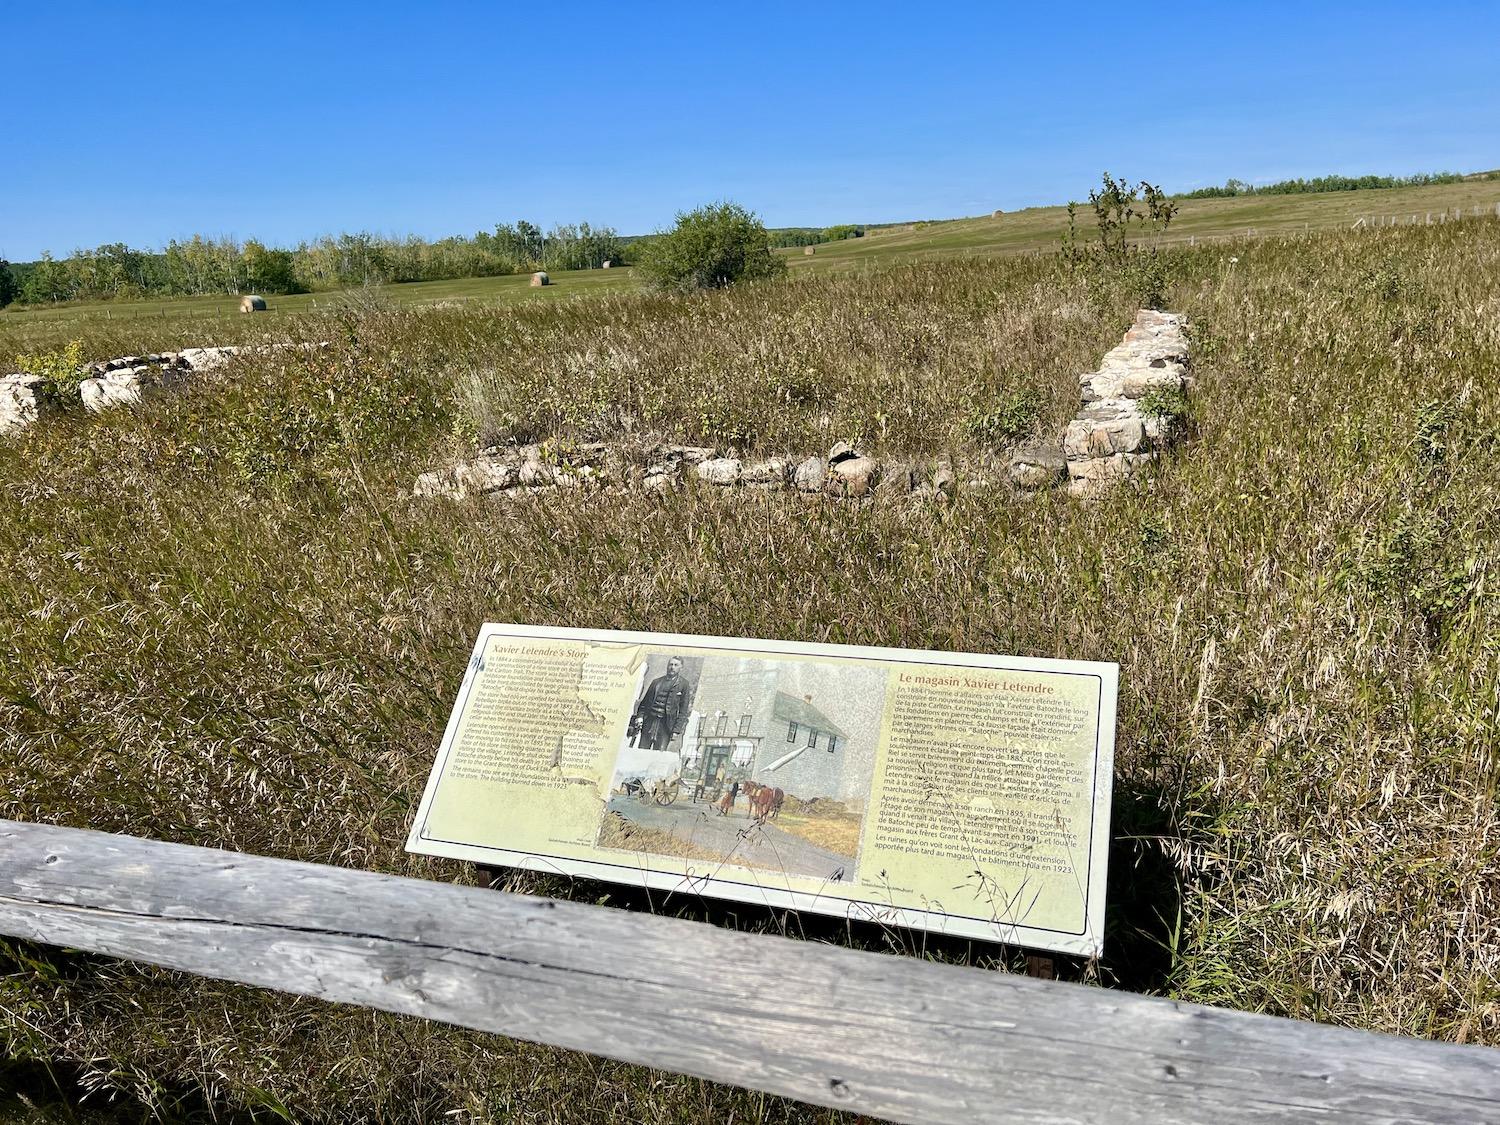 The remains of a store owned by Xavier Letendre, whose nickname Batoche was given to the village that sprung up here.